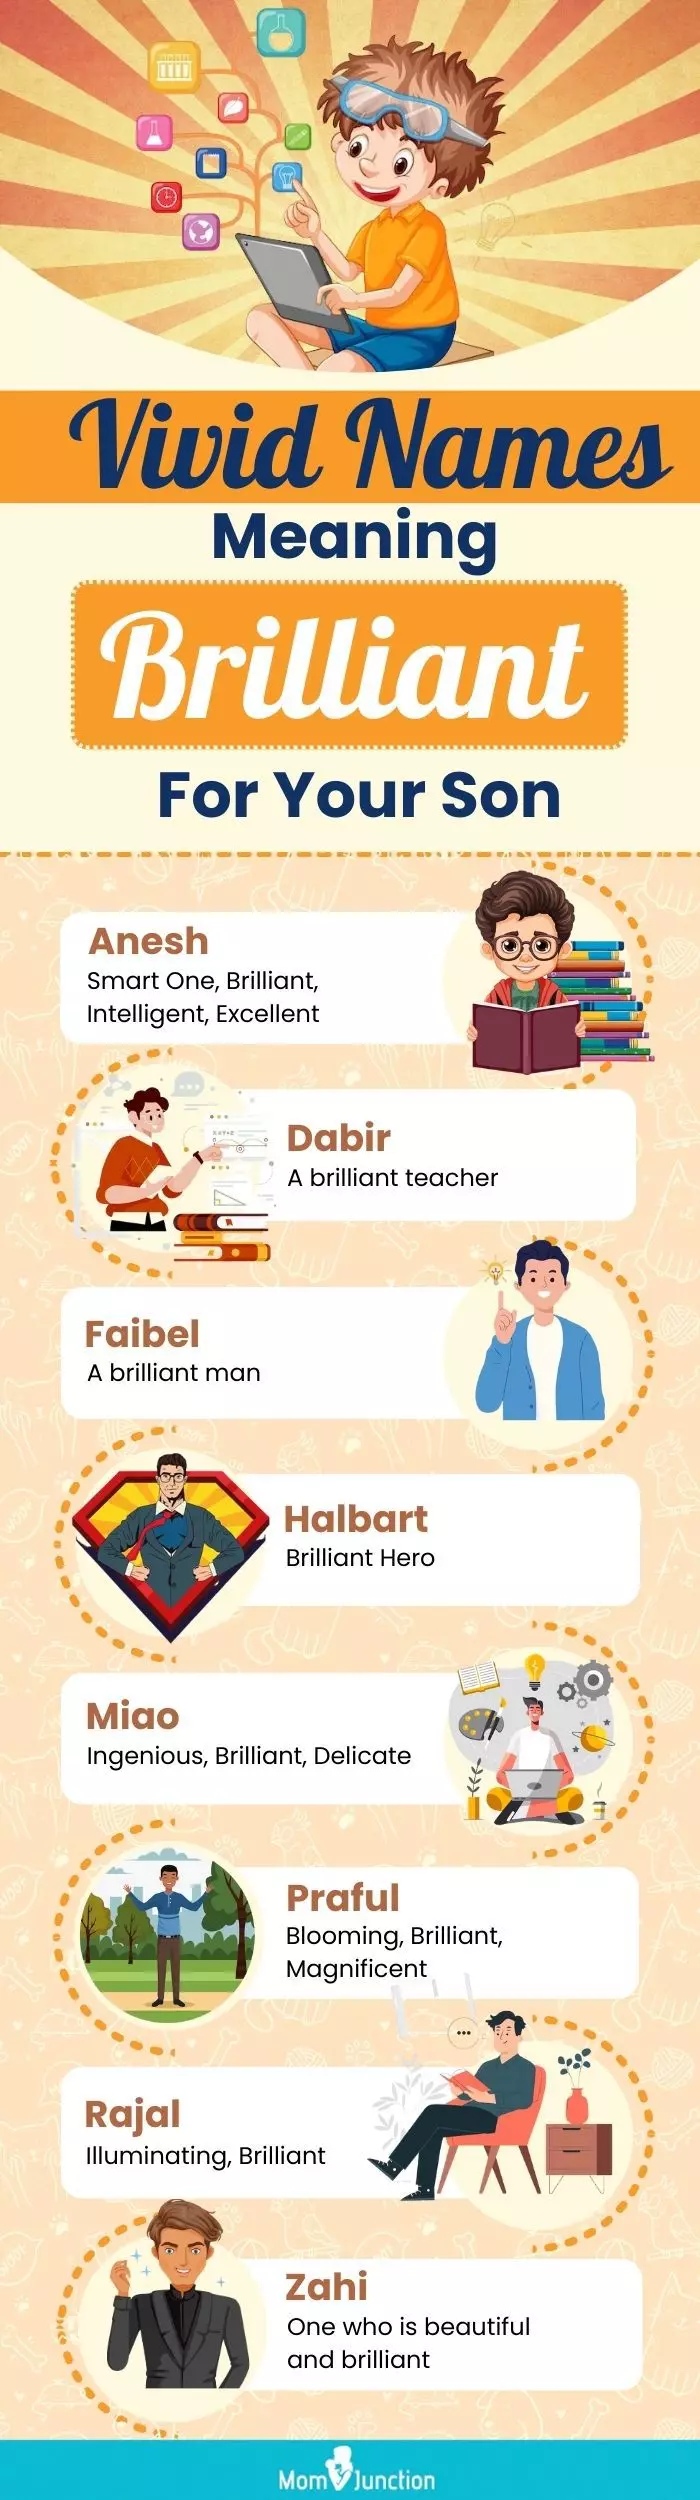 vivid names meaning brilliant for your son (infographic)